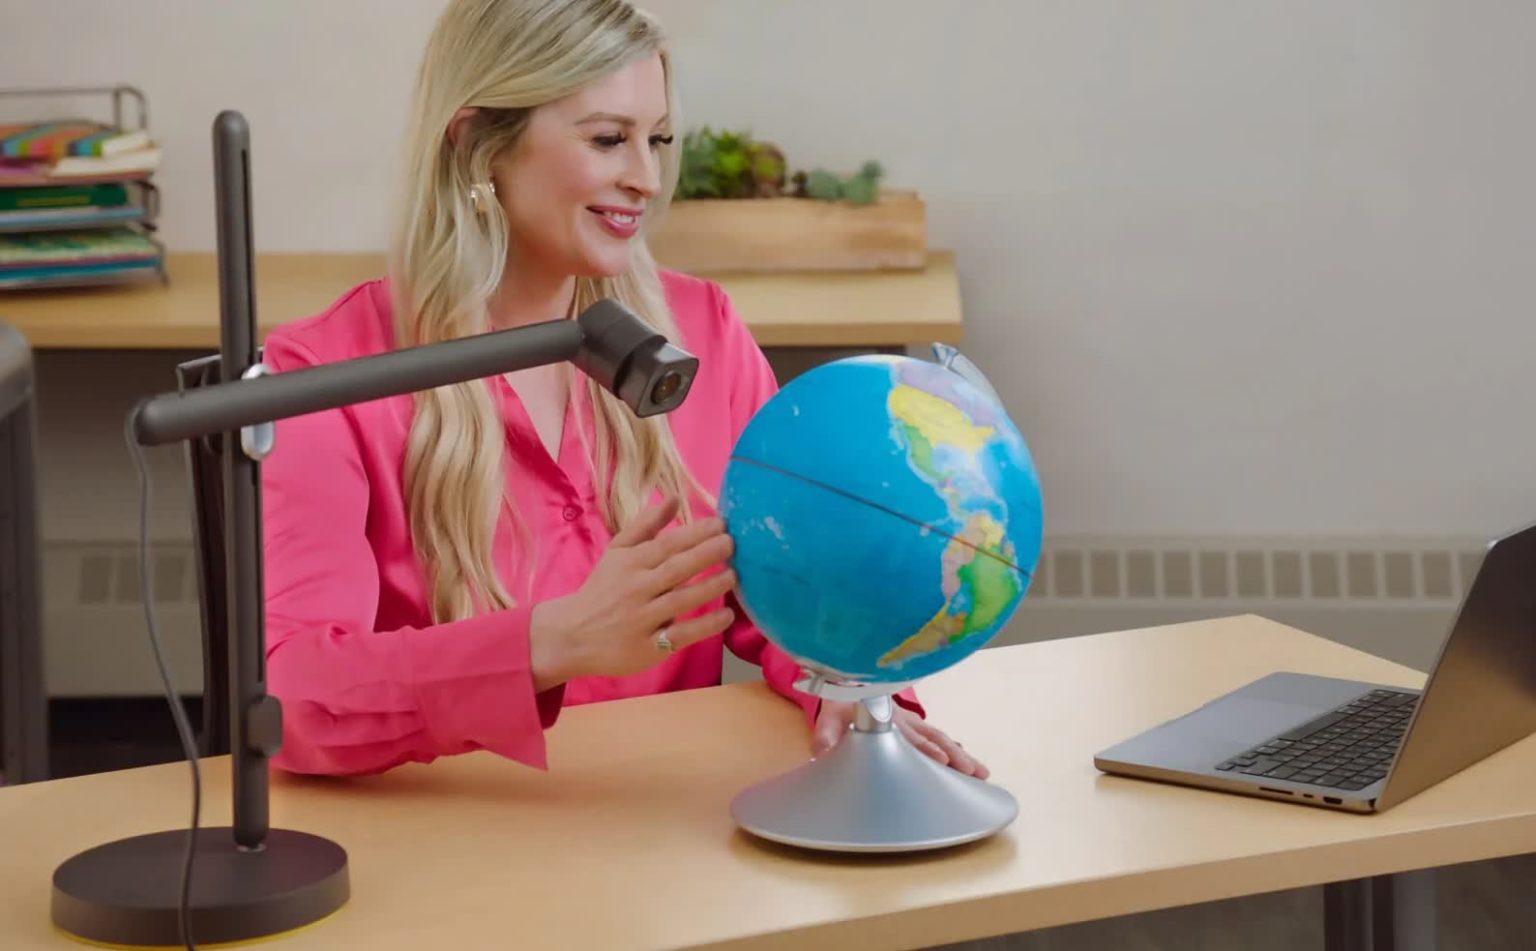 Logitech is crowdfunding a flexible show-and-tell webcam